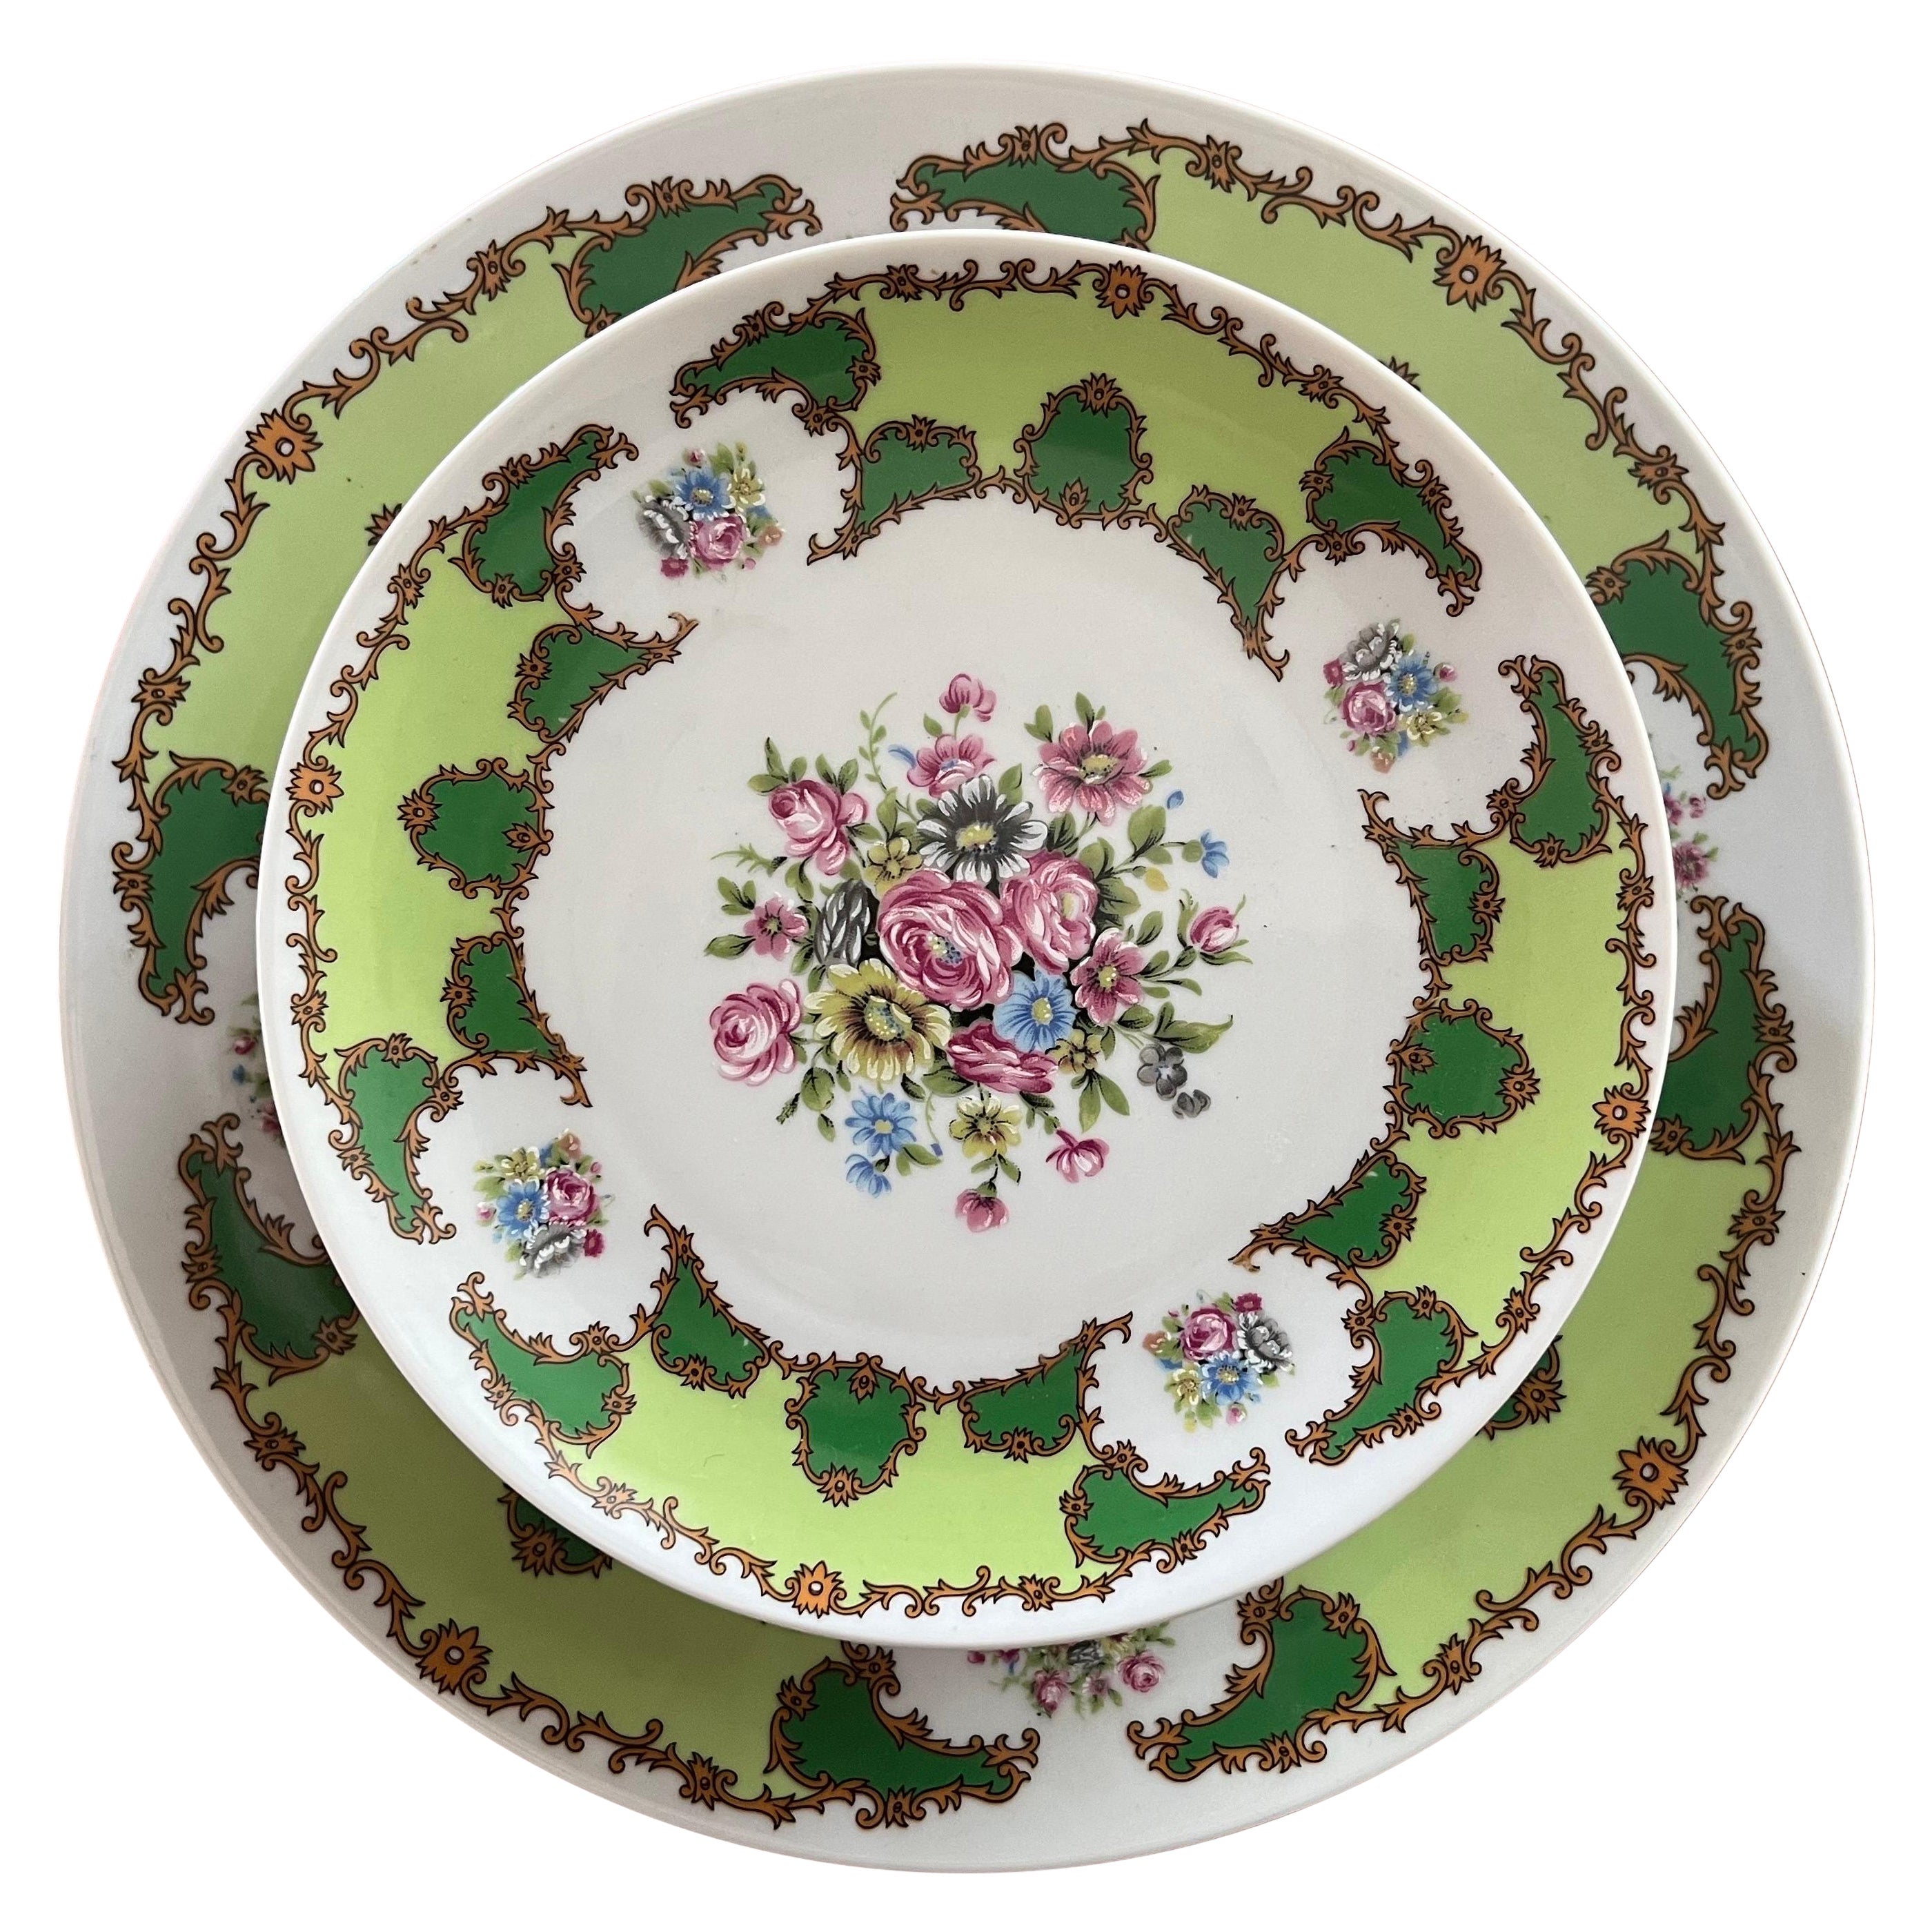 Coordinated Dessert Green Decorated Porcelain '900 -Antiques' For Sale